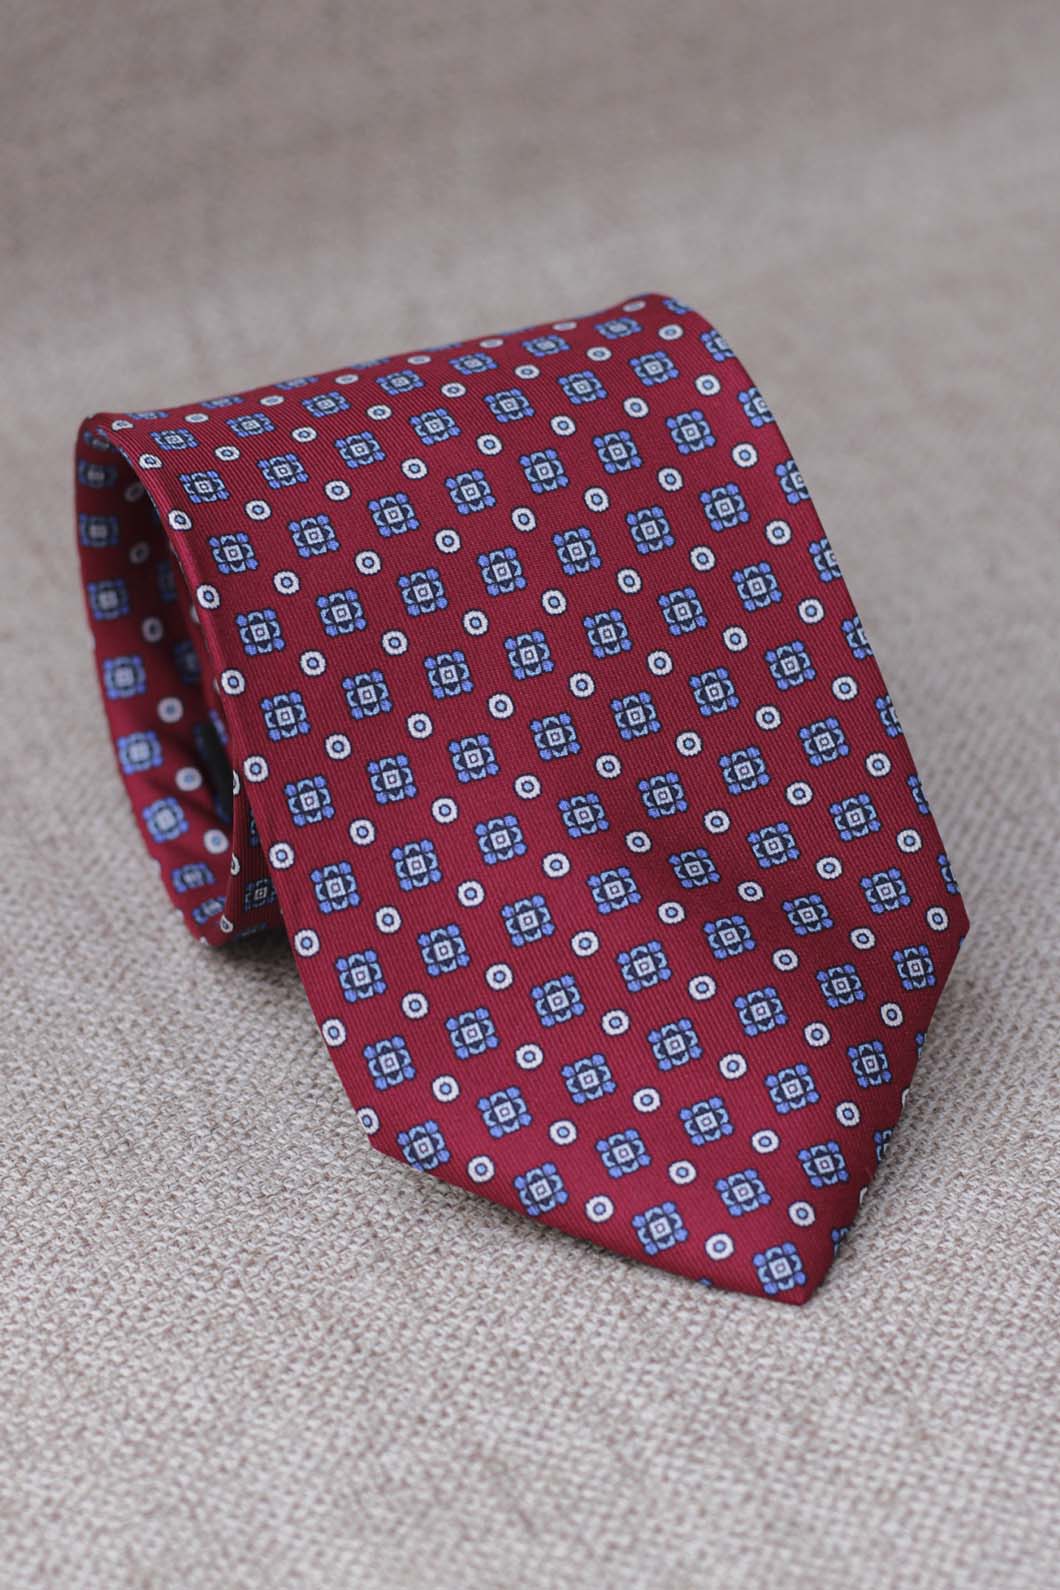 Napoli Silk Ruby Geometry Tie with White and Light Blue Daisies